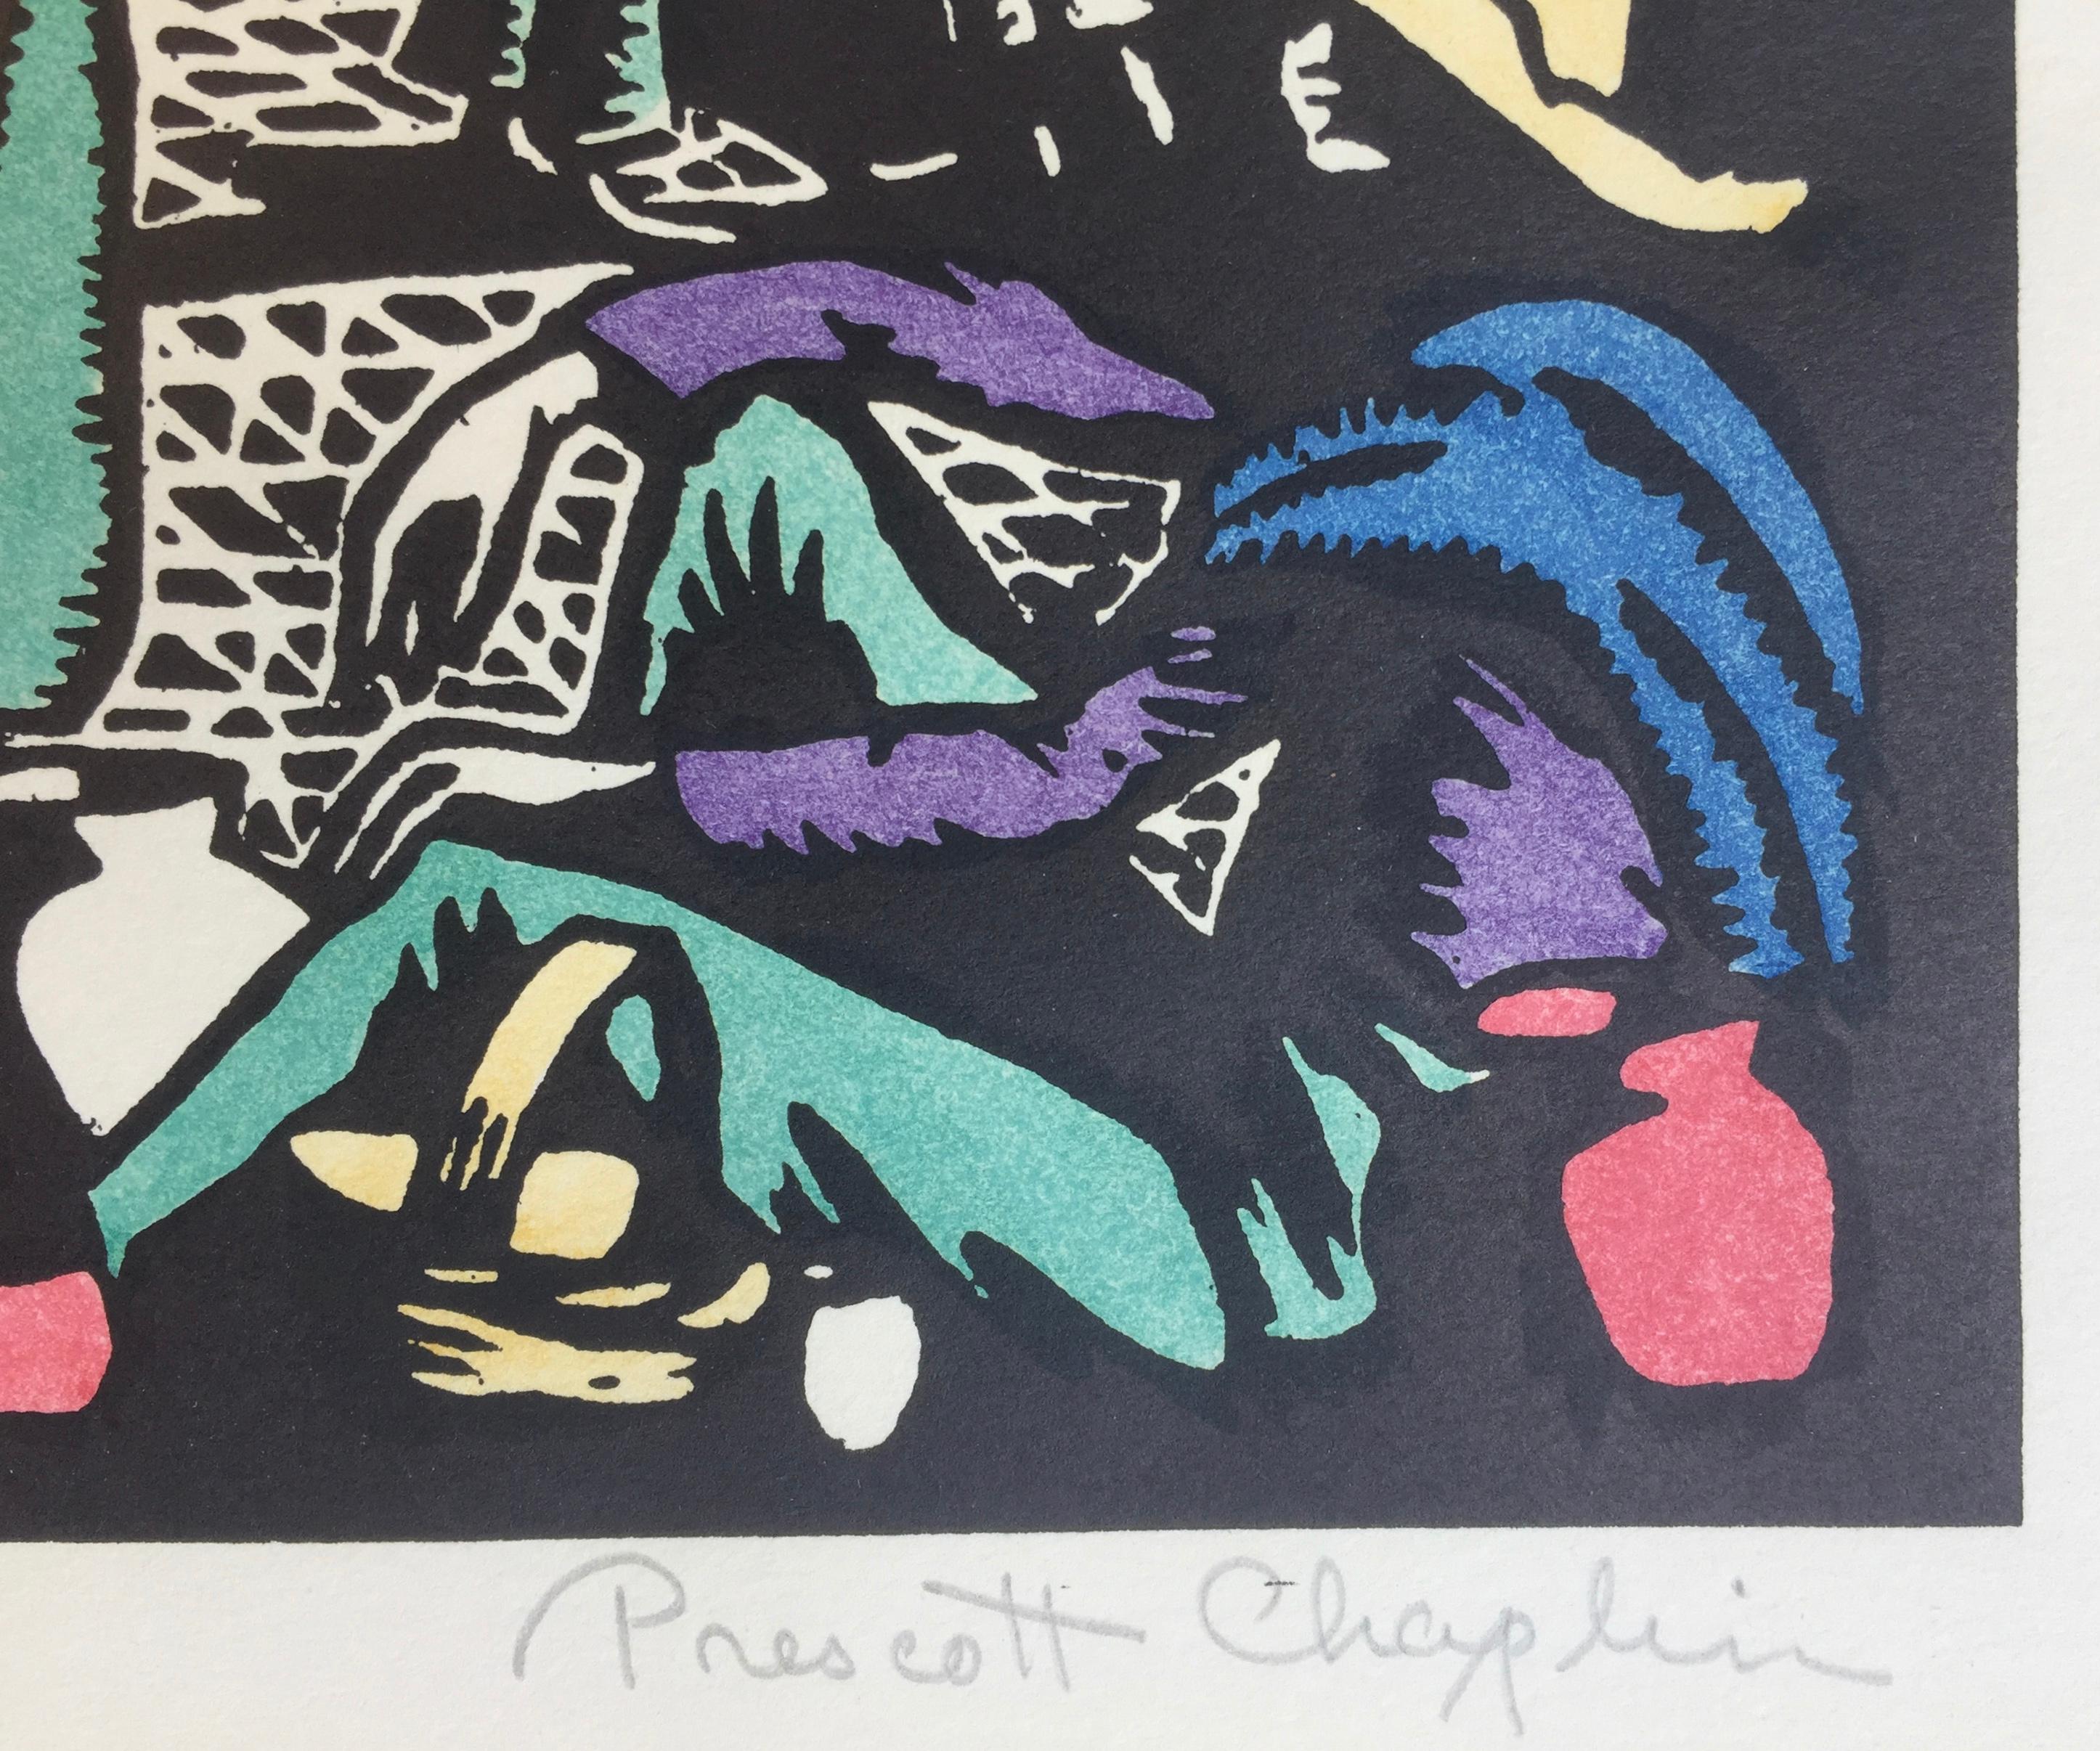 PRESCOTT CHAPLIN  (1897 - 1968)

MARKET DAY ca. 1931
Linoleum cut with hand coloring. Signed and titled in pencil. Image 8 1/4 x 10 5/8 inches., sheet 12 3/4 x 18 inches. In excellent condition with bright colors. His prints are often found on poor